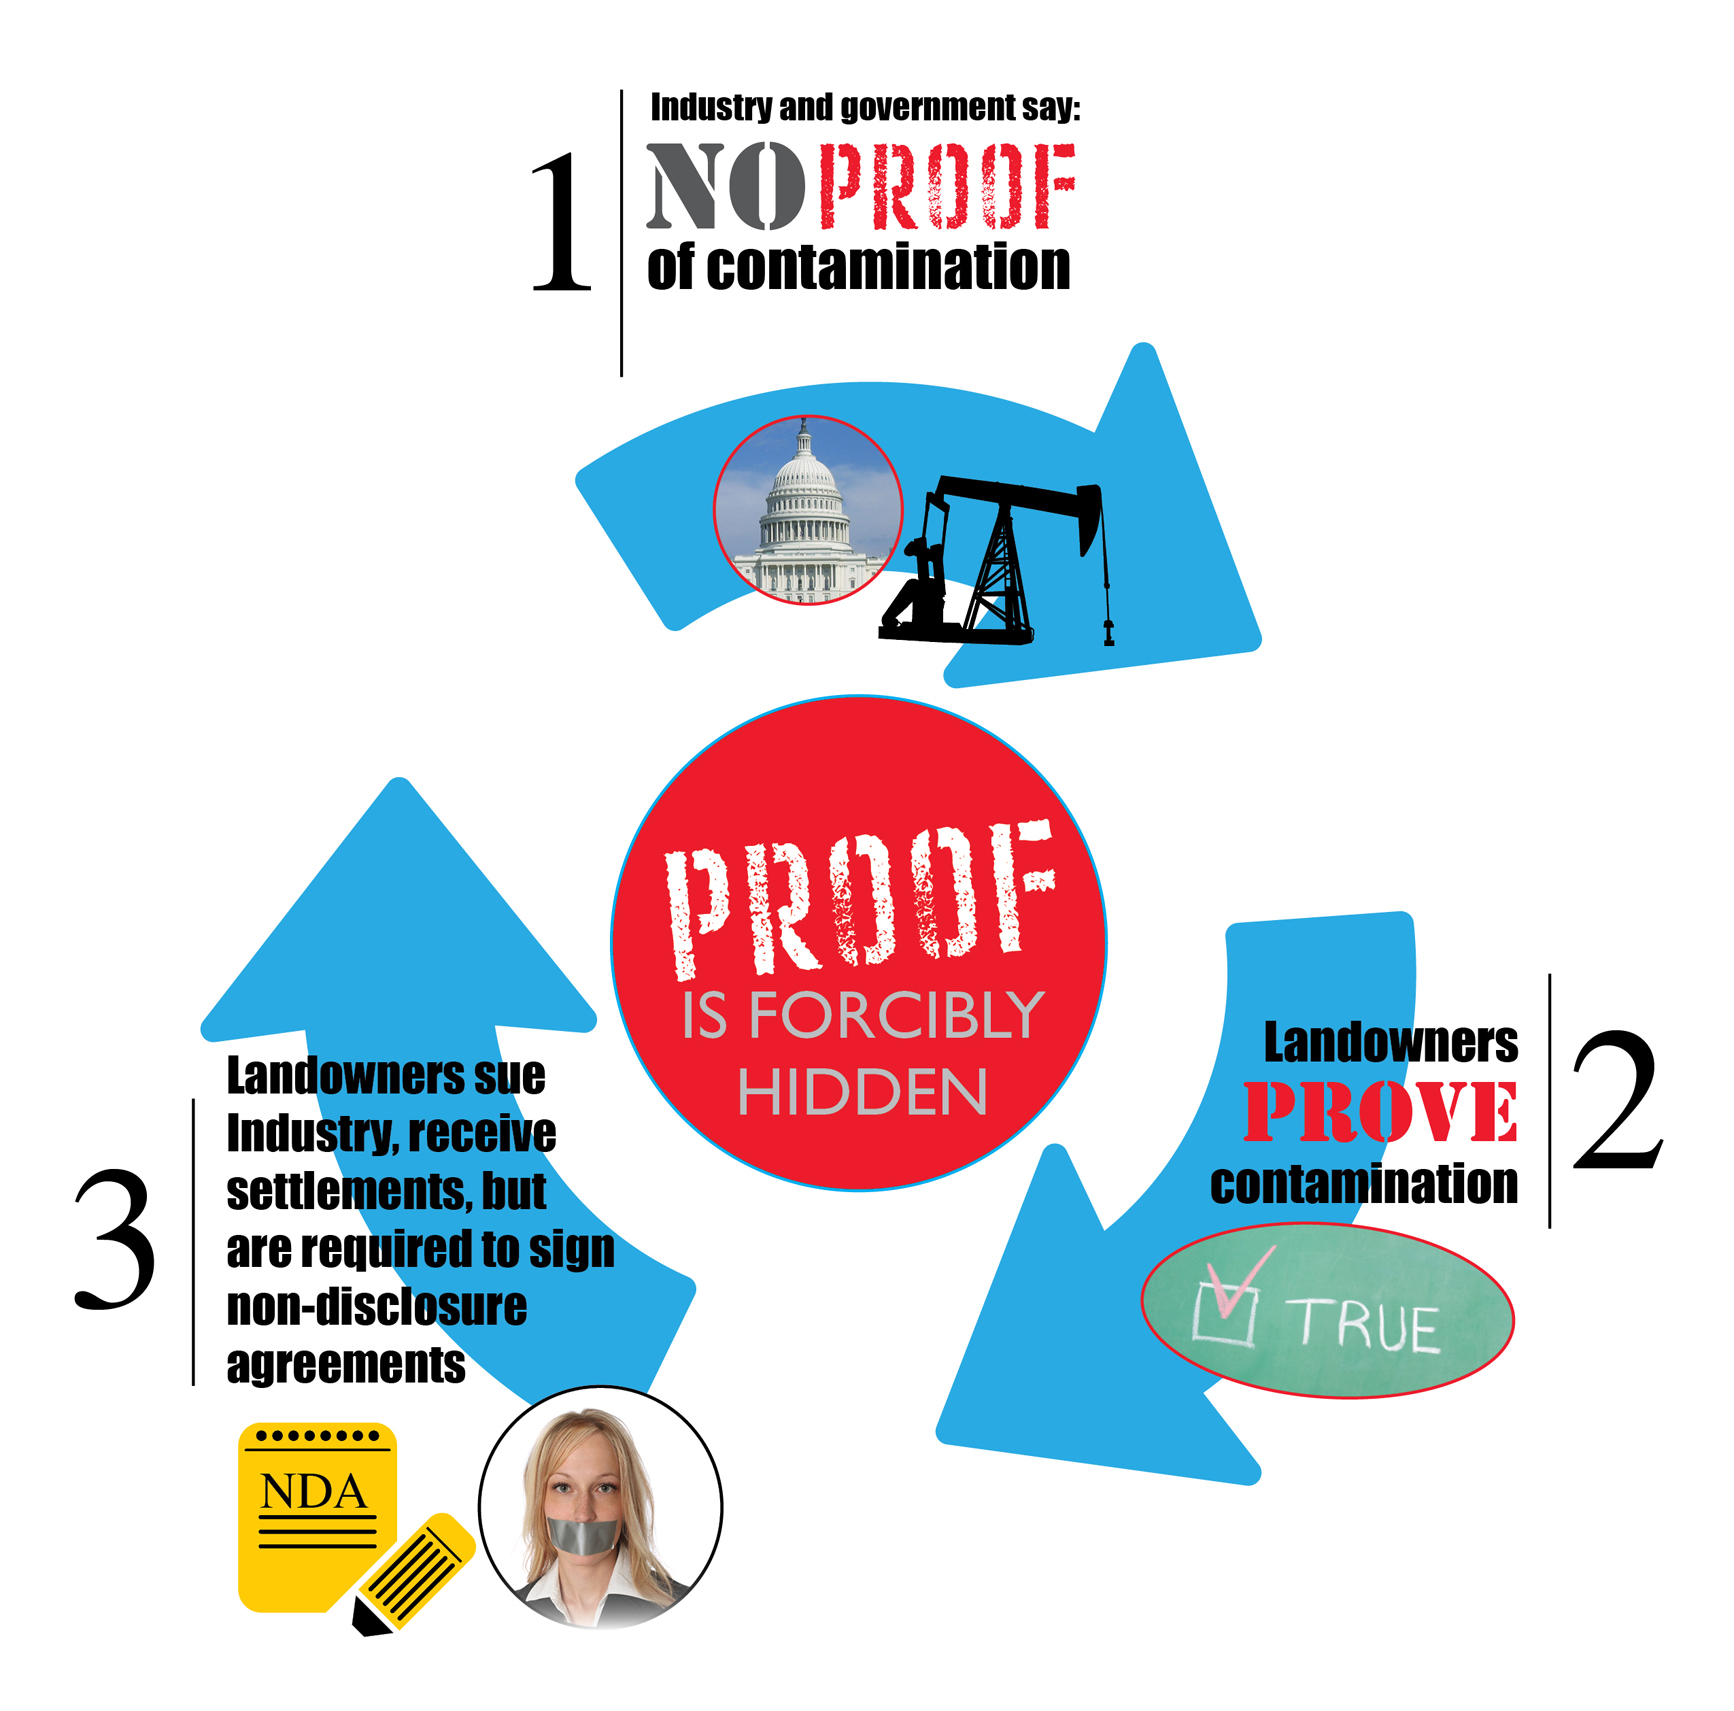 cycle-of-fracking-denial-non-disclosure-agreements-gag-orders-proof-is-forcibly-hidden